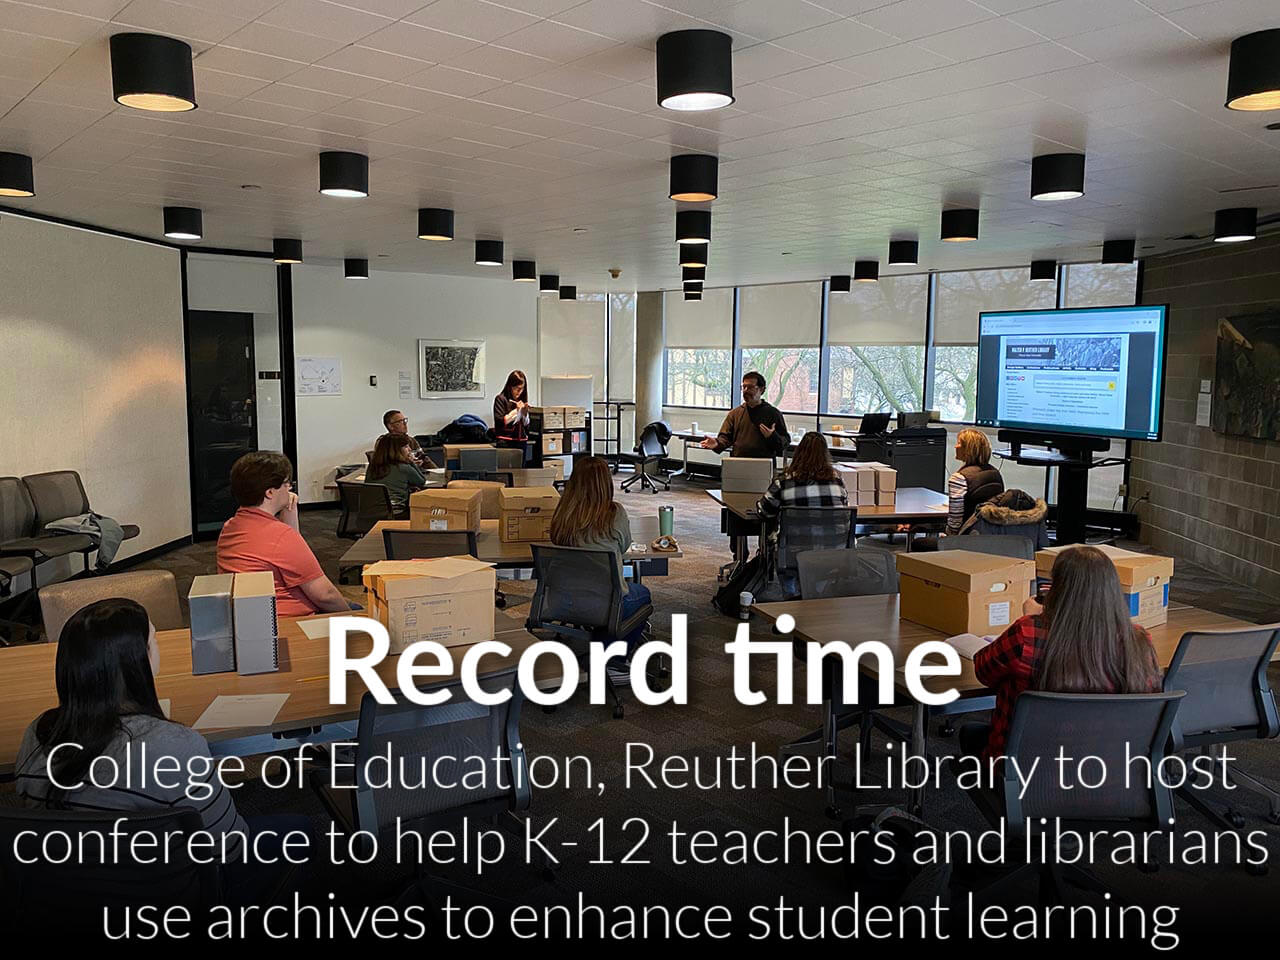 Wayne State University College of Education and Walter P. Reuther Library host free two-day conference to help K-12 teachers and librarians use archives to enhance student learning